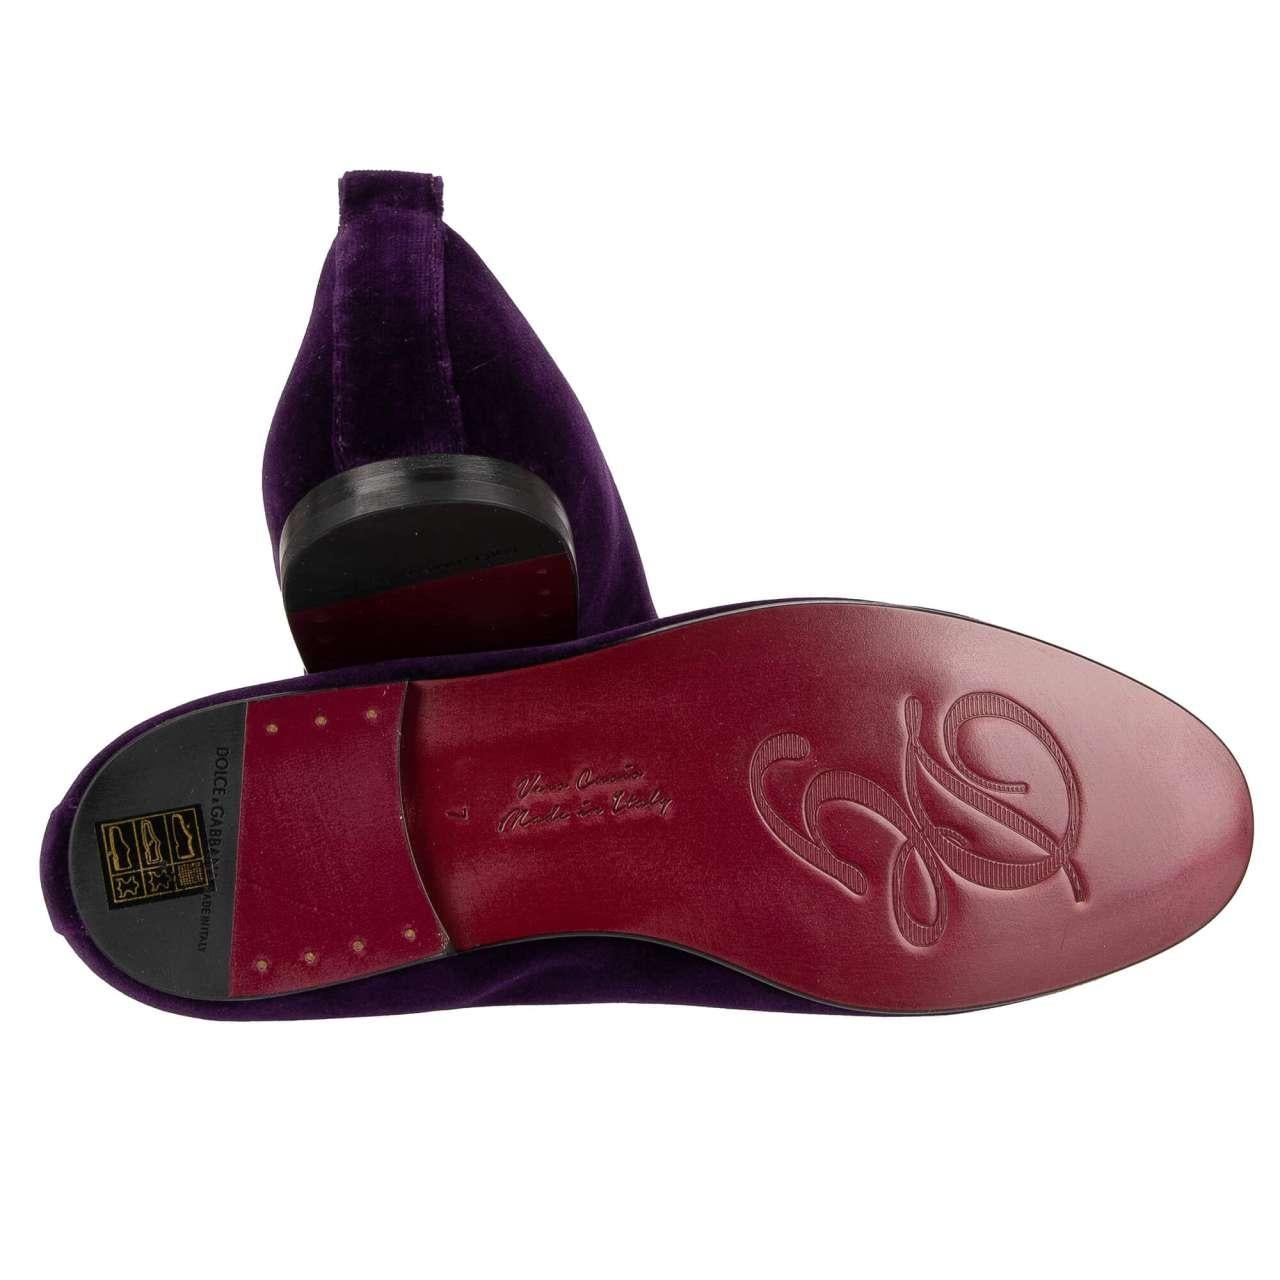 D&G - Heart Logo Embroidered Velvet Loafer YOUNG POPE Purple Red EUR 41 For Sale 3